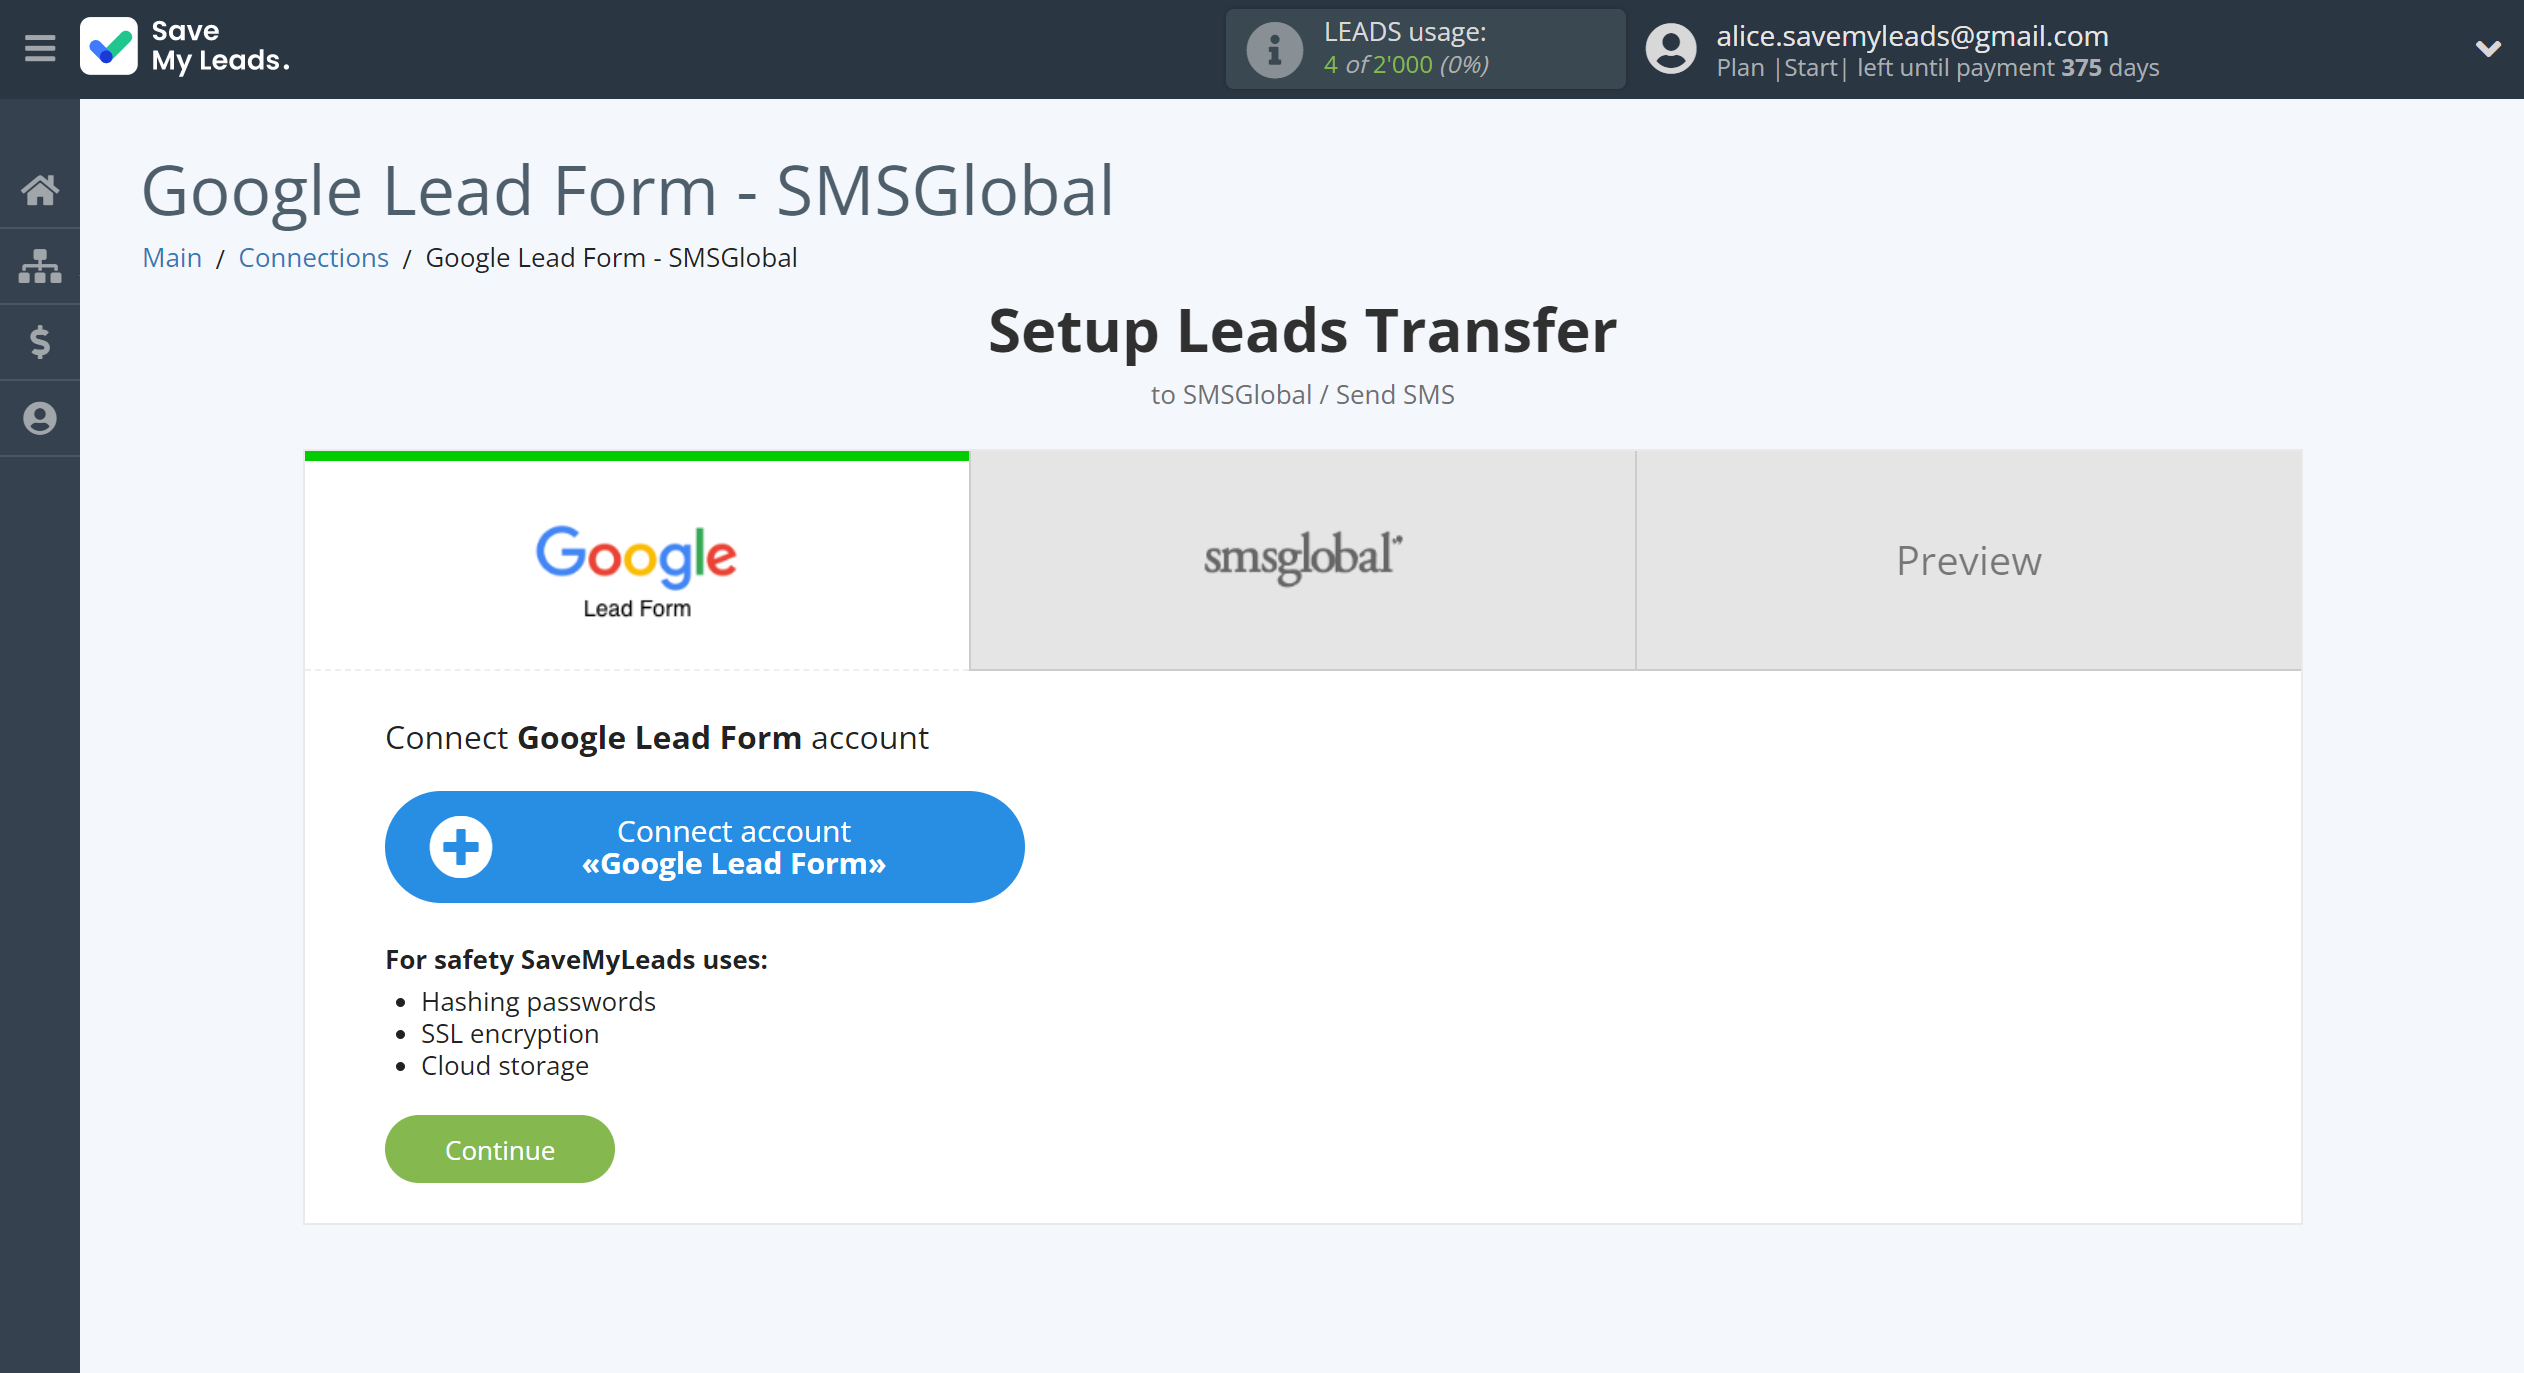 How to Connect Google Lead Form with SMSGlobal | Data Source account connection